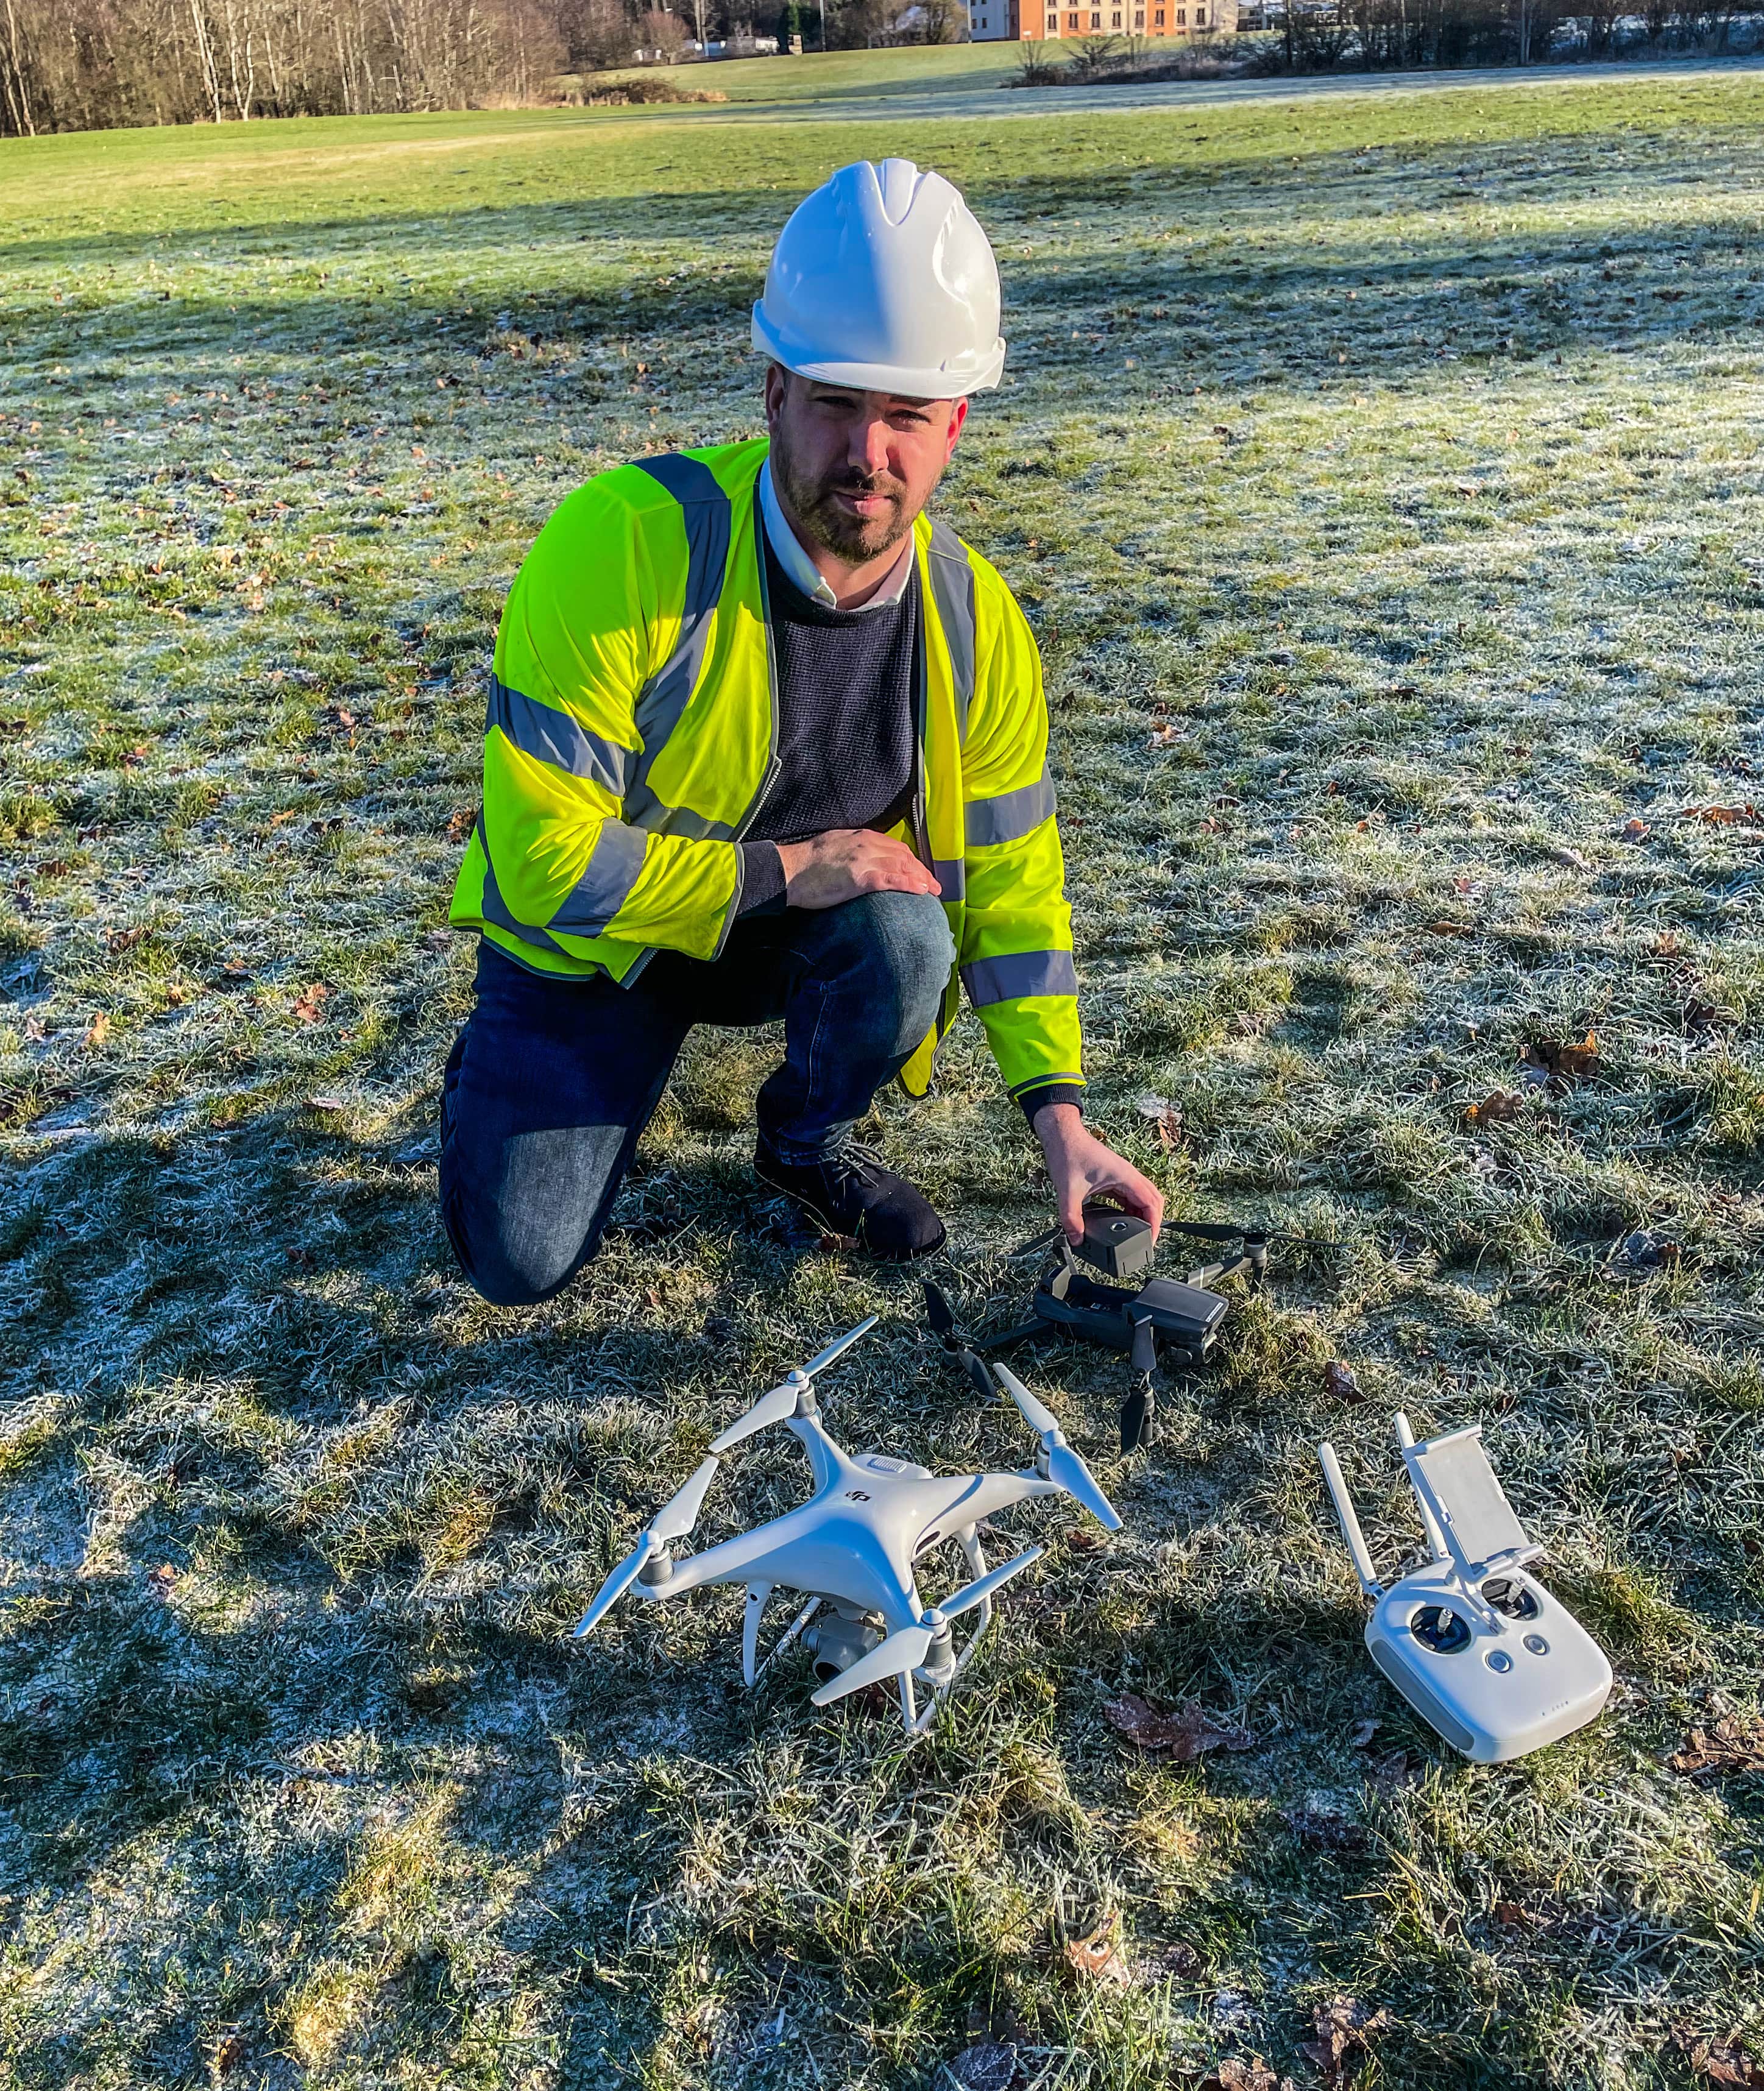 Scottish drone business flying high with extensive services following support from Business Gateway